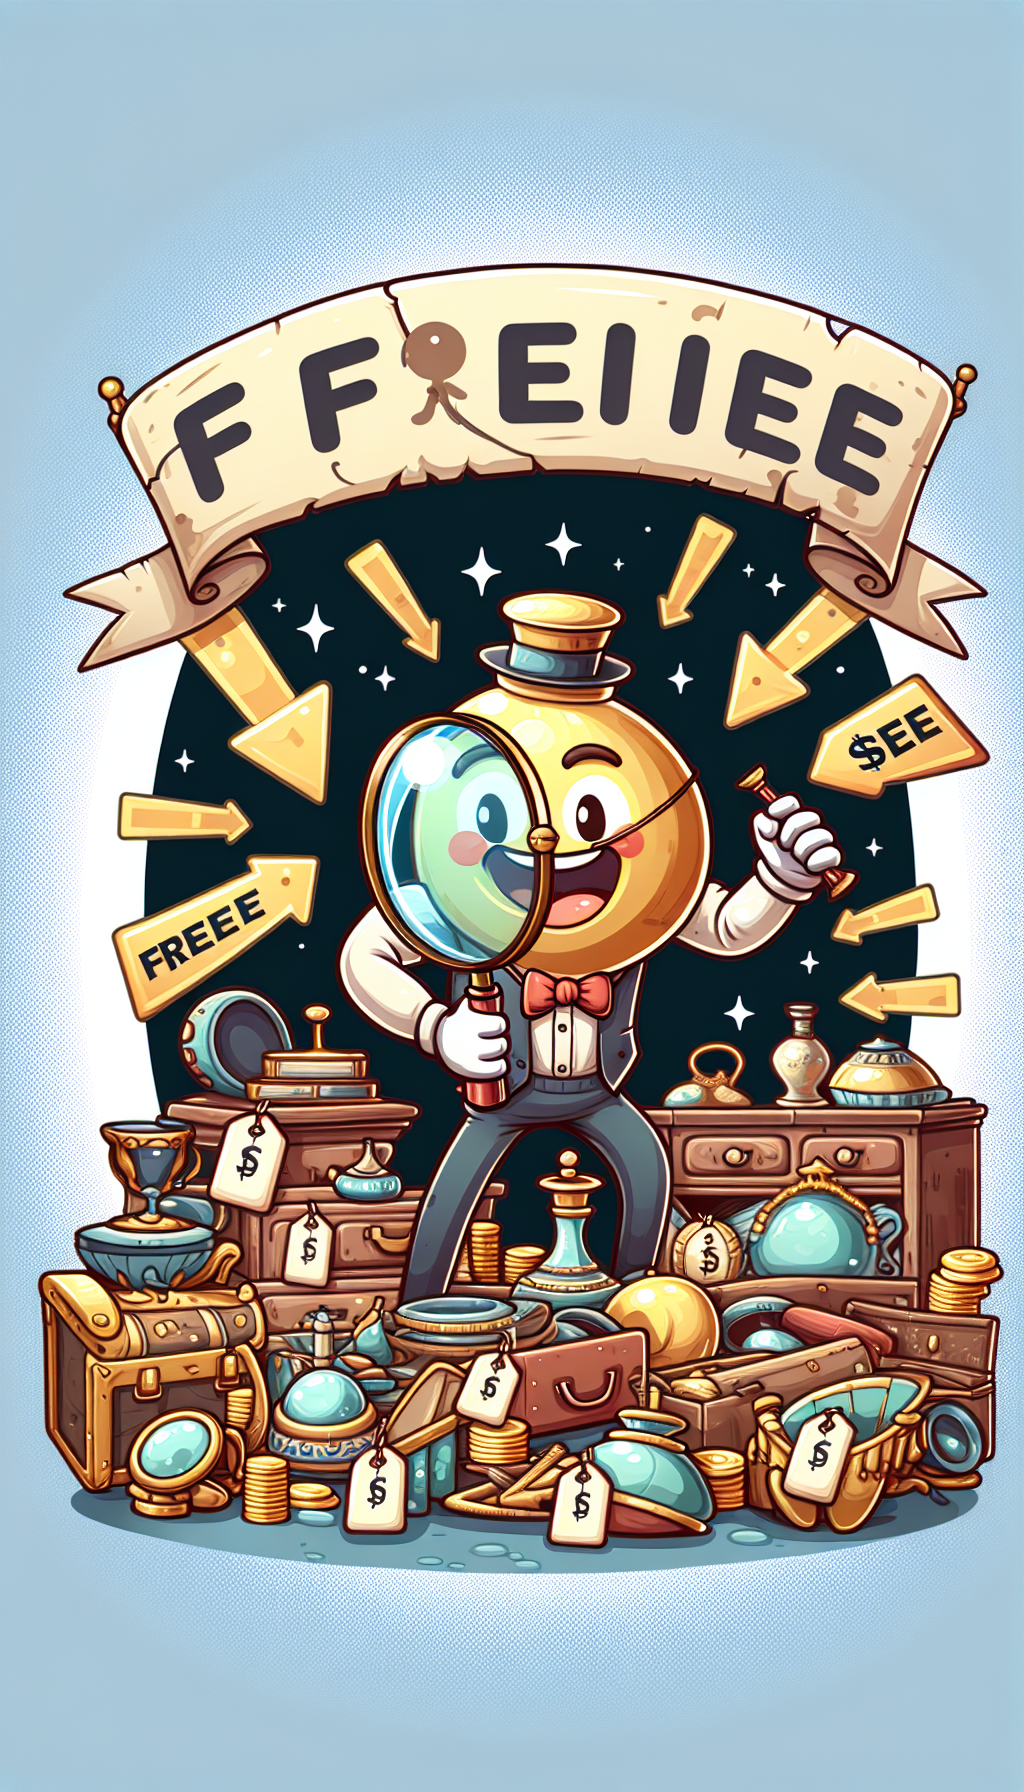 An illustration of a delighted character holding a magnifying glass, scrutinizing a vintage, treasure-laden attic, with items glowing slightly to signify their value. Above the scene, a whimsical banner flutters with the word "FREE" and arrows pointing towards a queue of antiques. Each antique has a price tag reading "$0" to highlight the free appraisal concept.